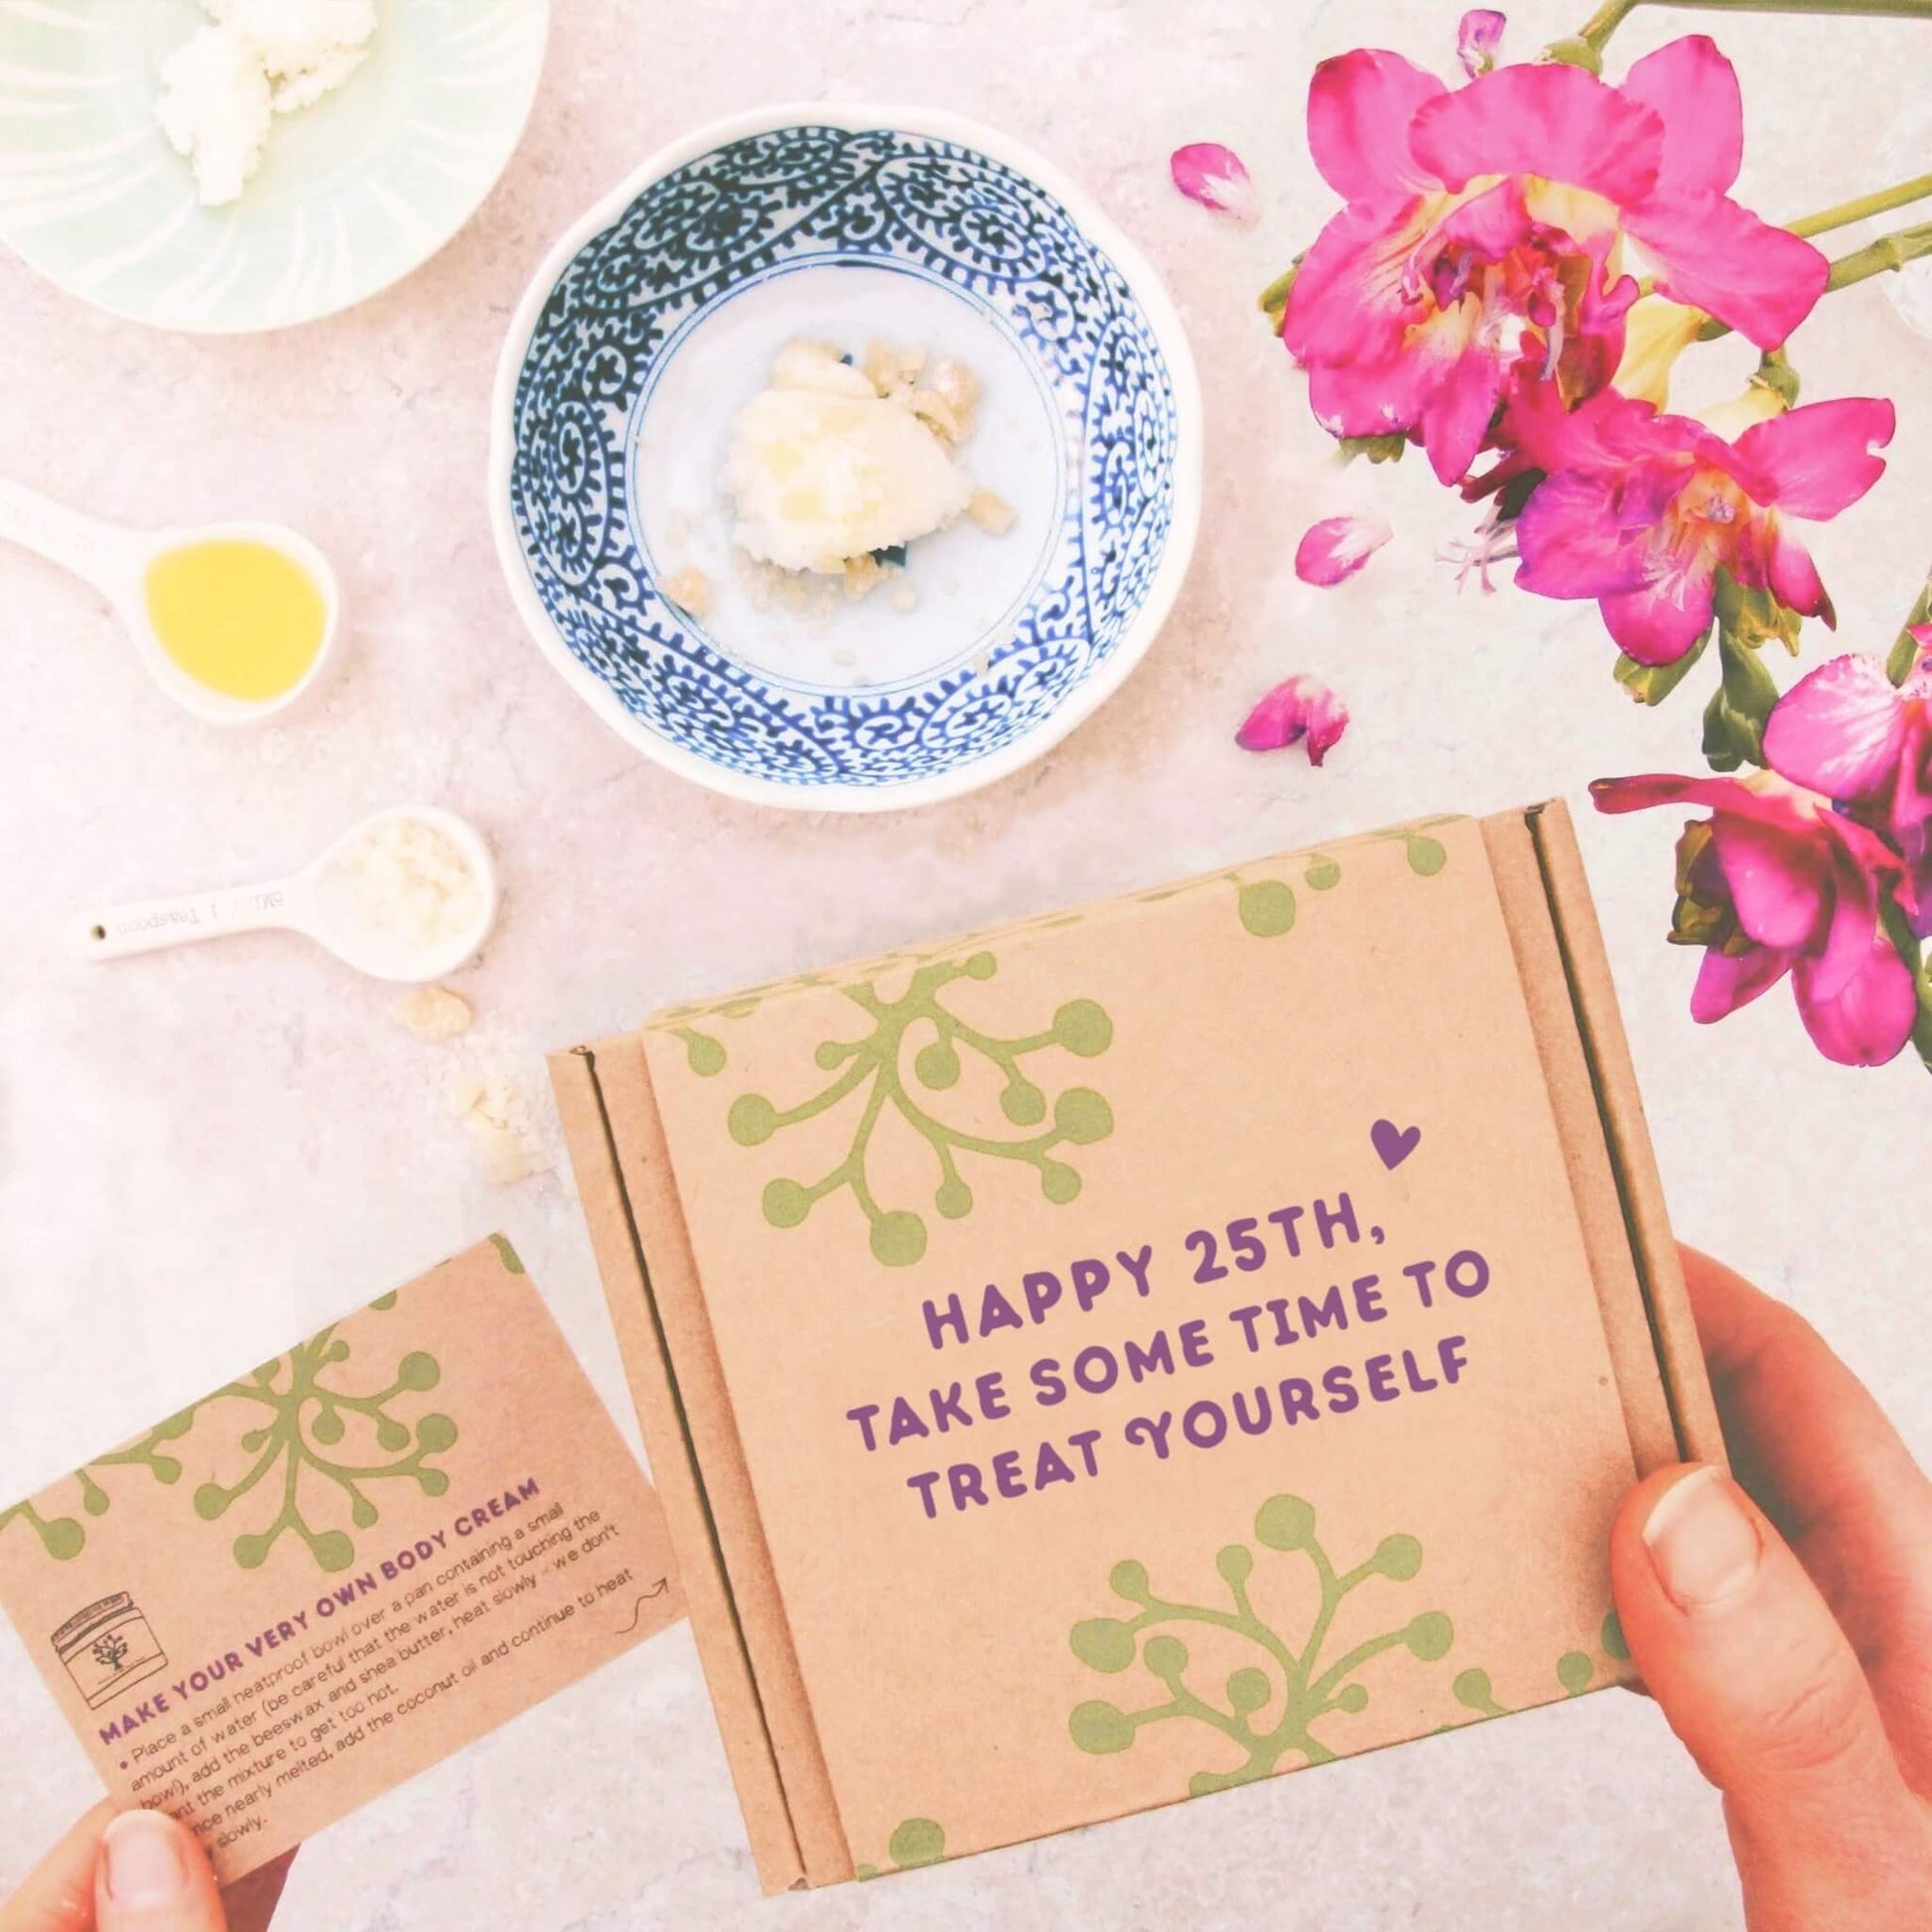 25th birthday gift with gift message "happy 25th, take some time to treat yourself"